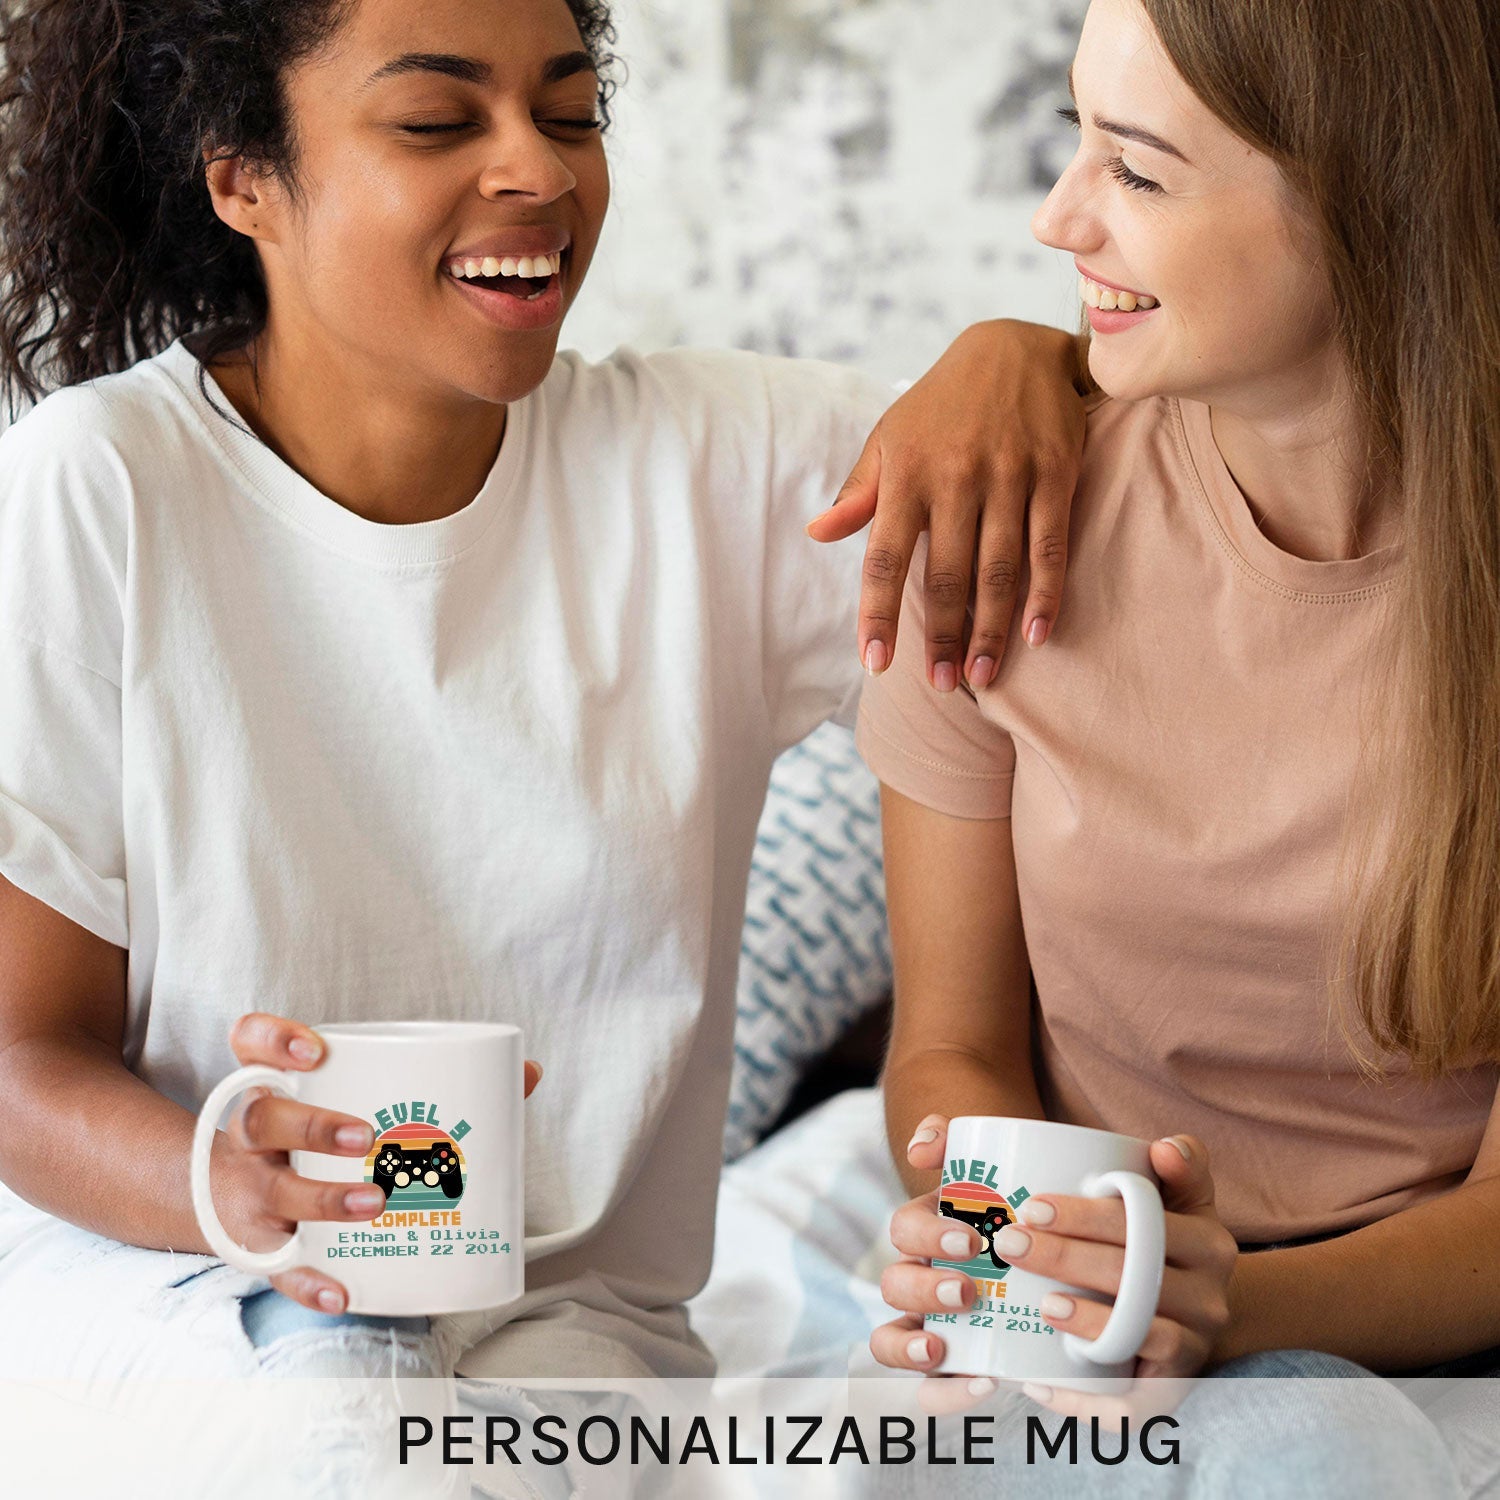 Level 9 Complete - Personalized 9 Year Anniversary gift for him for her - Custom Mug - MyMindfulGifts